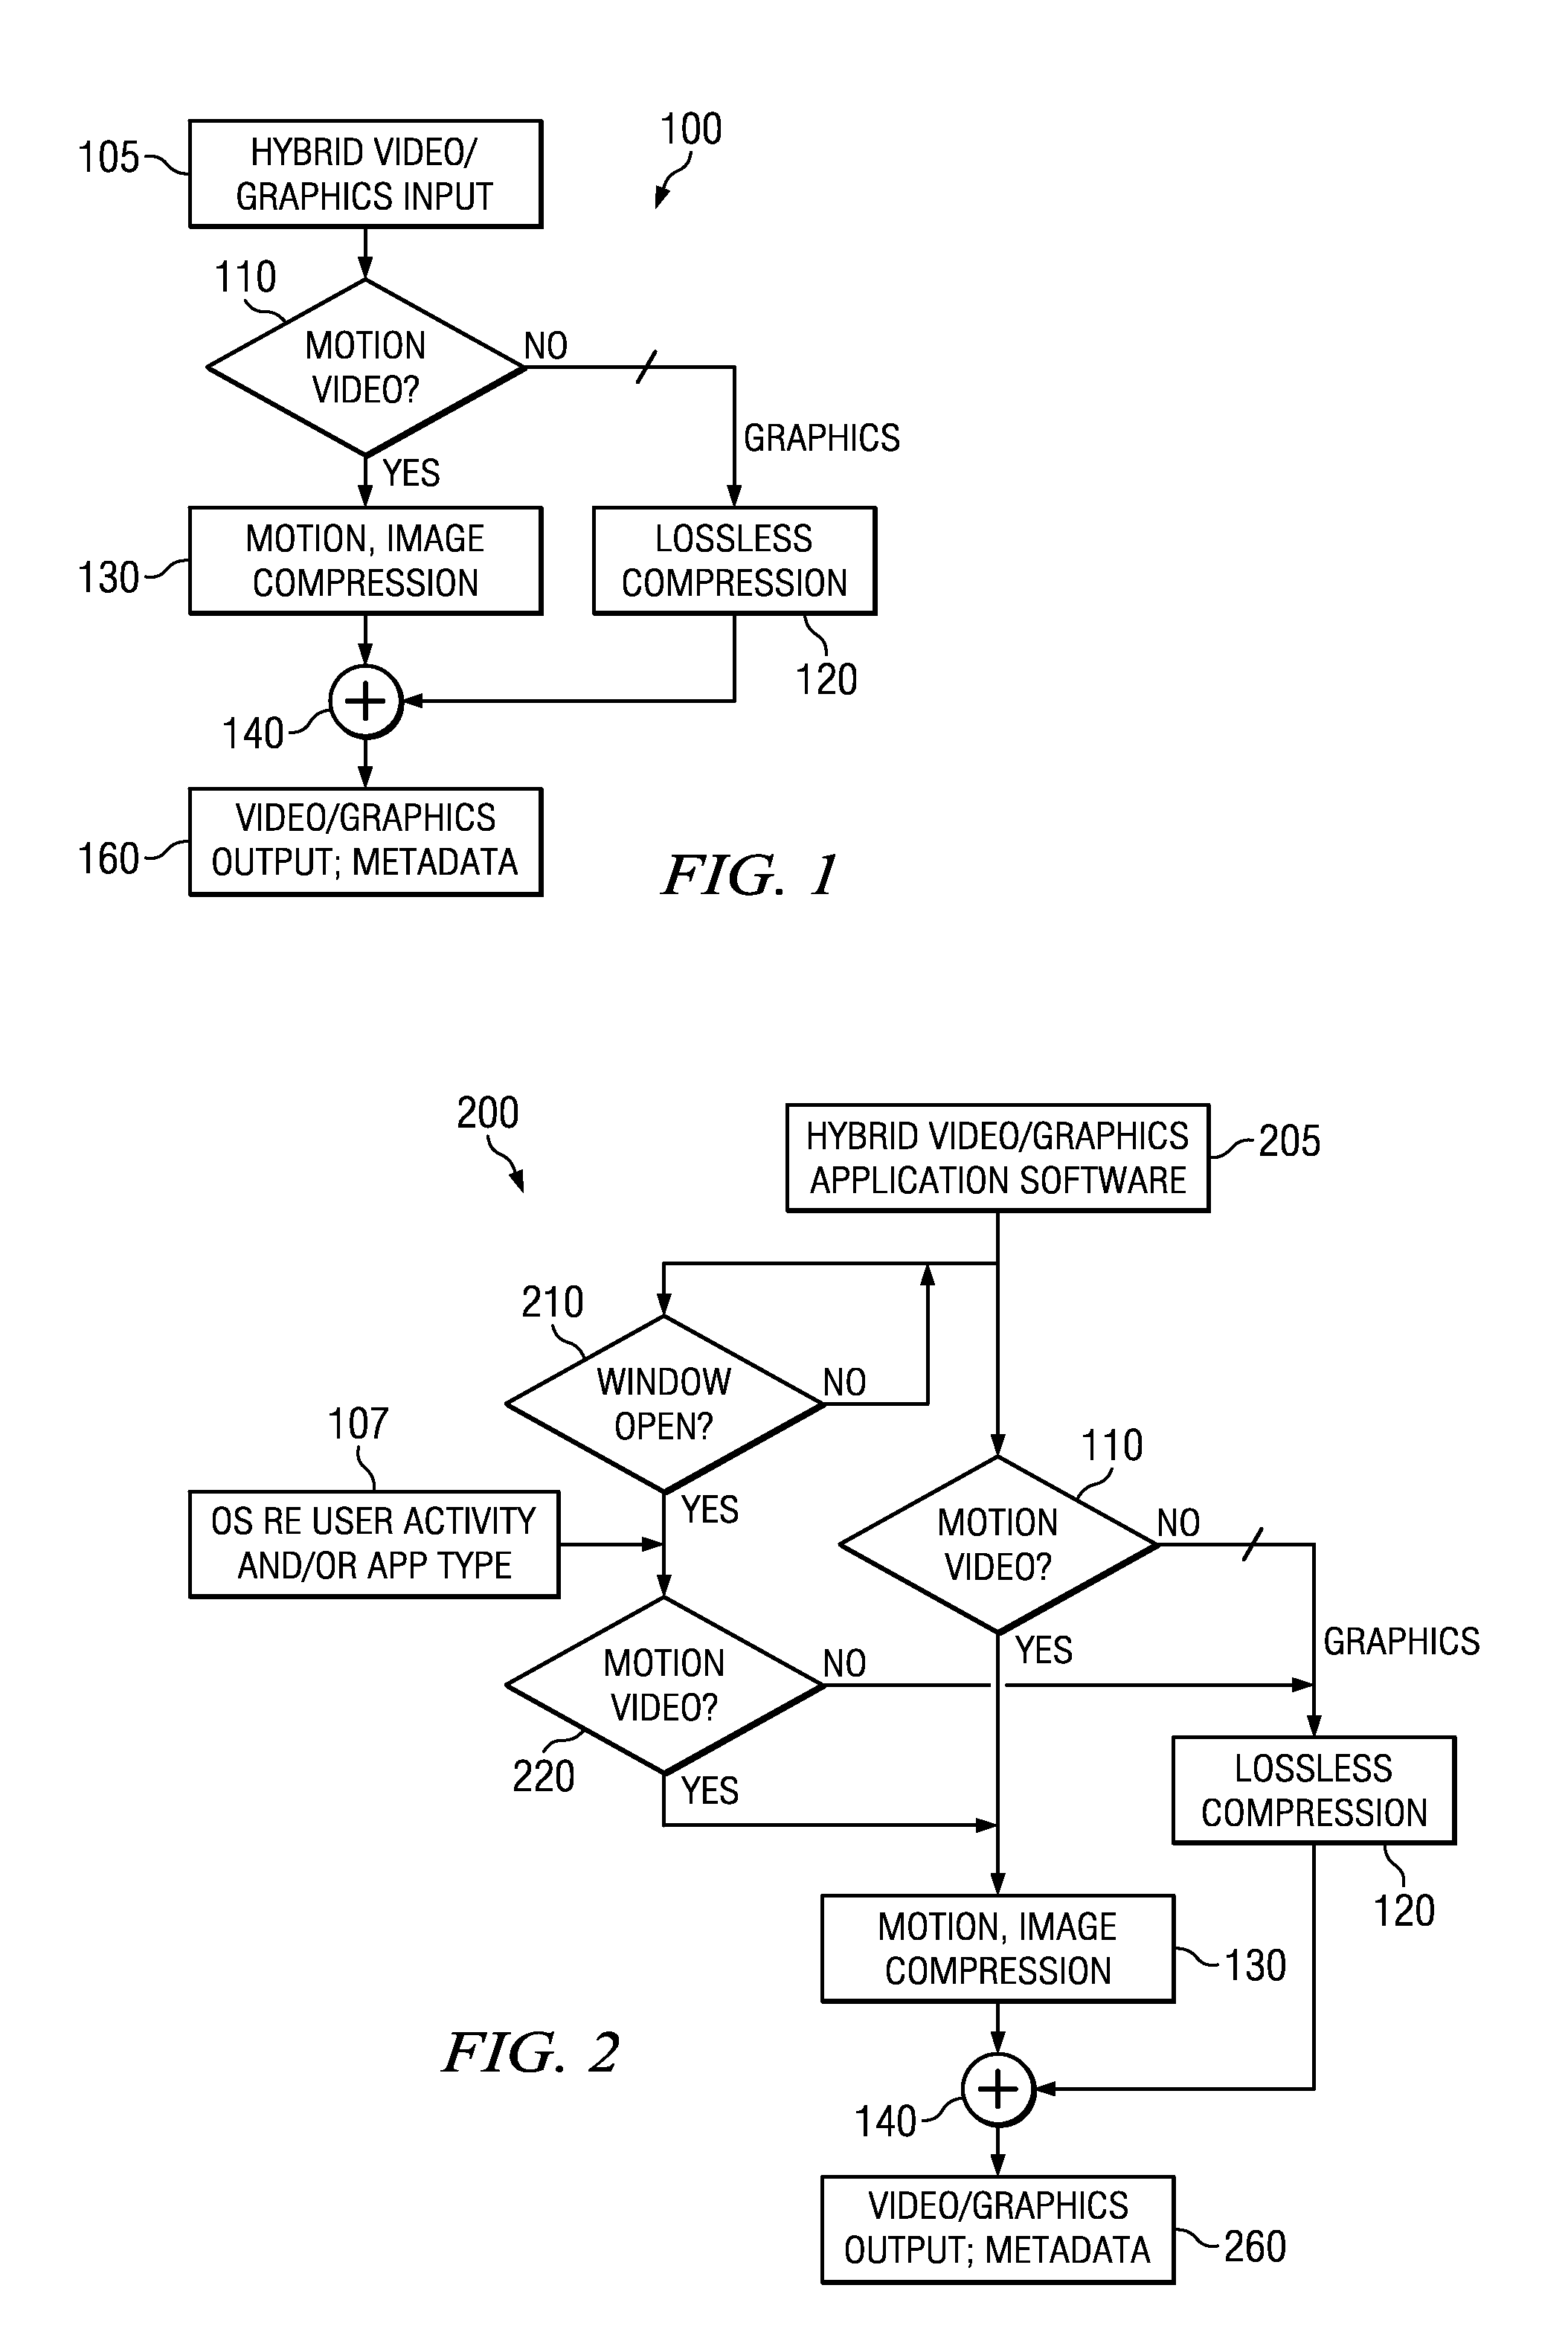 Hybrid video and graphics system with automatic content detection process, and other circuits, processes, and systems